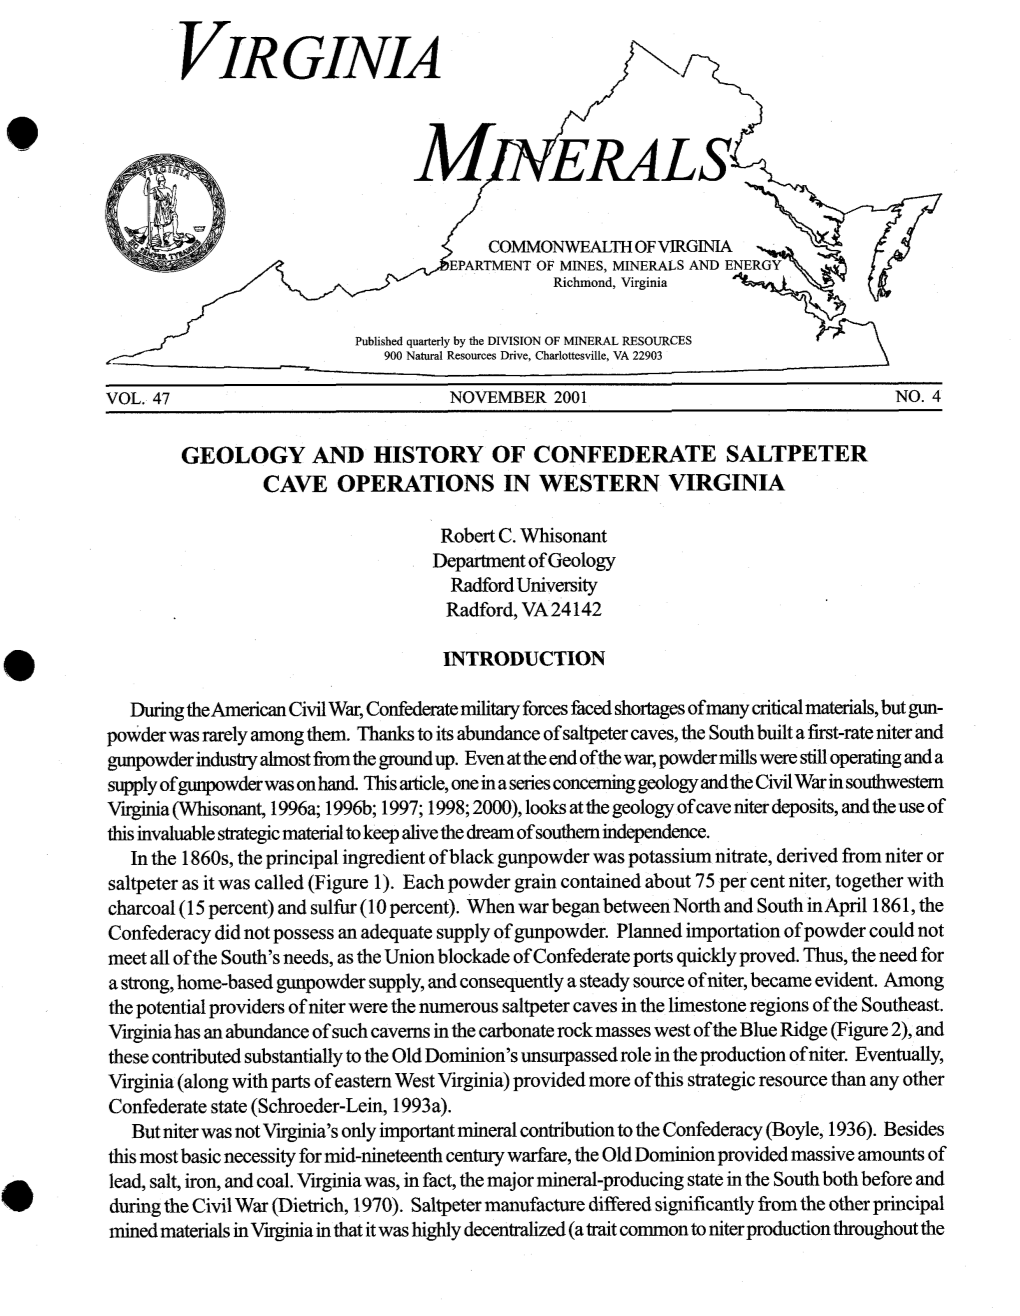 "Geology and History of Confederate Saltpeter Cave Operations In